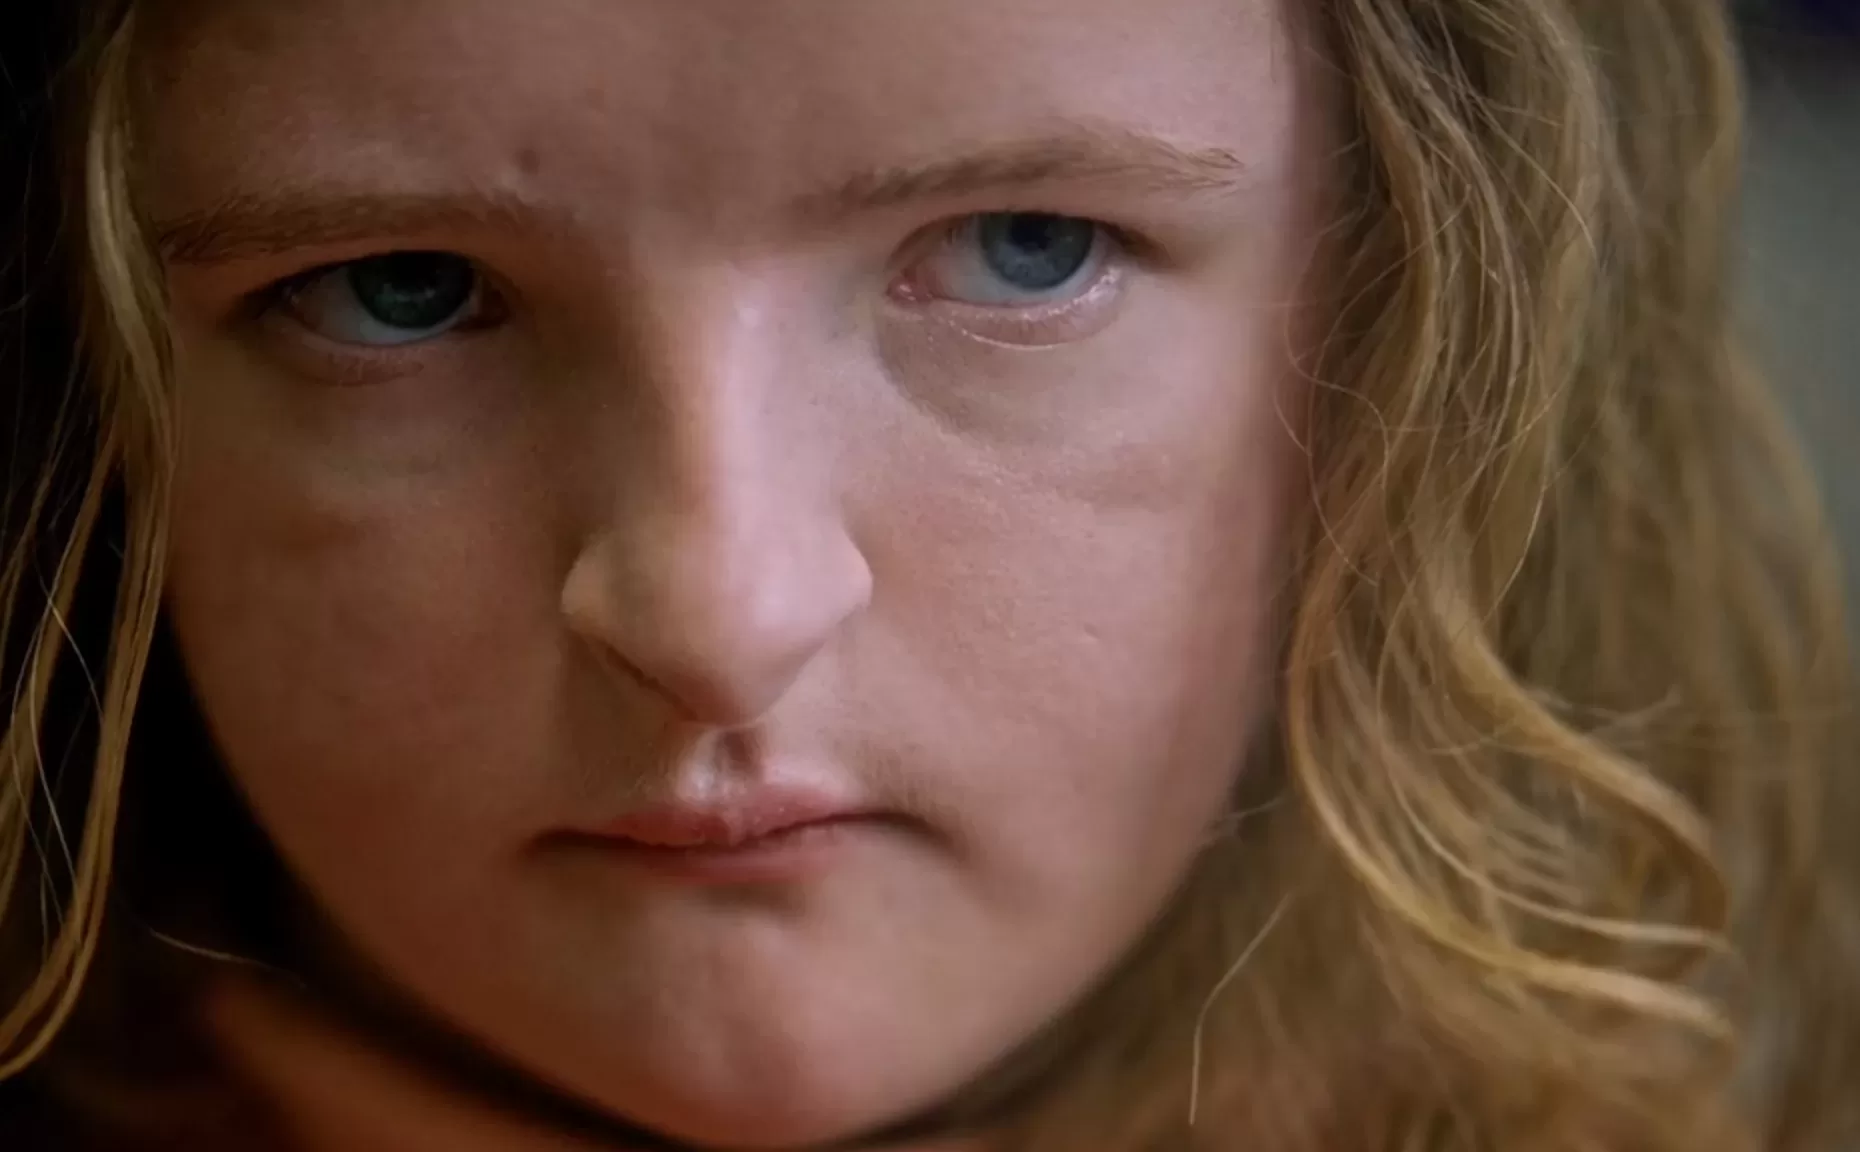 creepy little girls is what this girl from Hereditary is